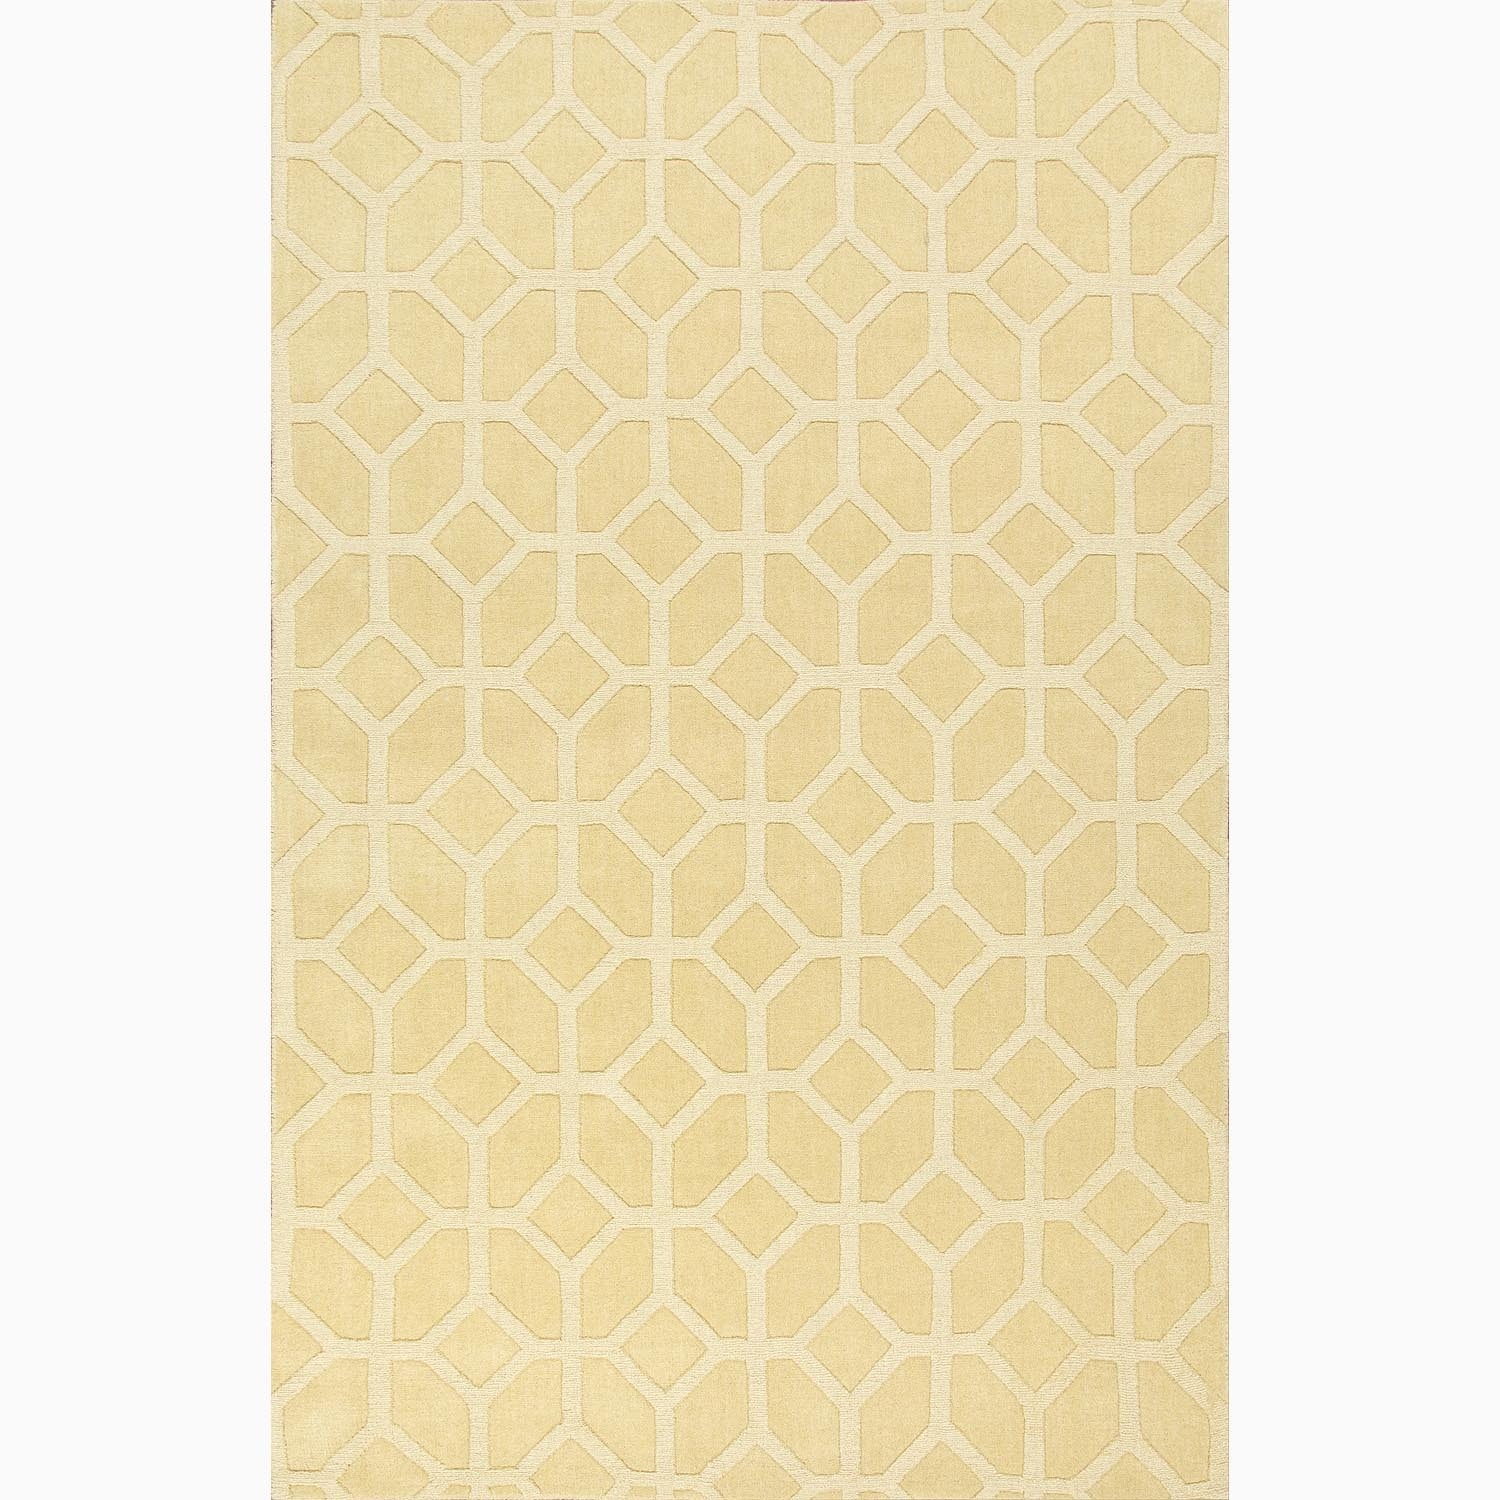 Hand made Yellow/ Gold Wool Textured Rug (8x11)